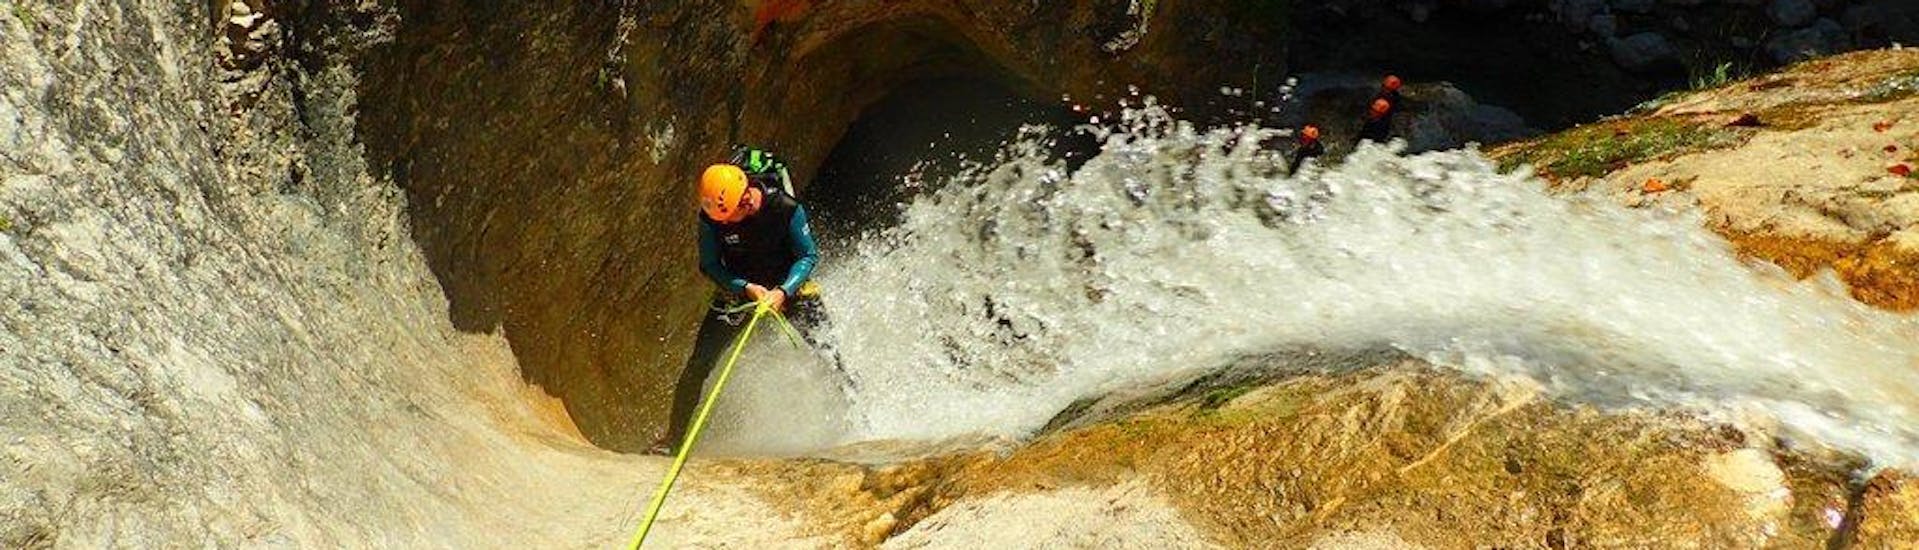 A man abseiling down a waterfall as part of his Canoying day trip in Fischbach & Almbach with Torrent Outdoor Experience.